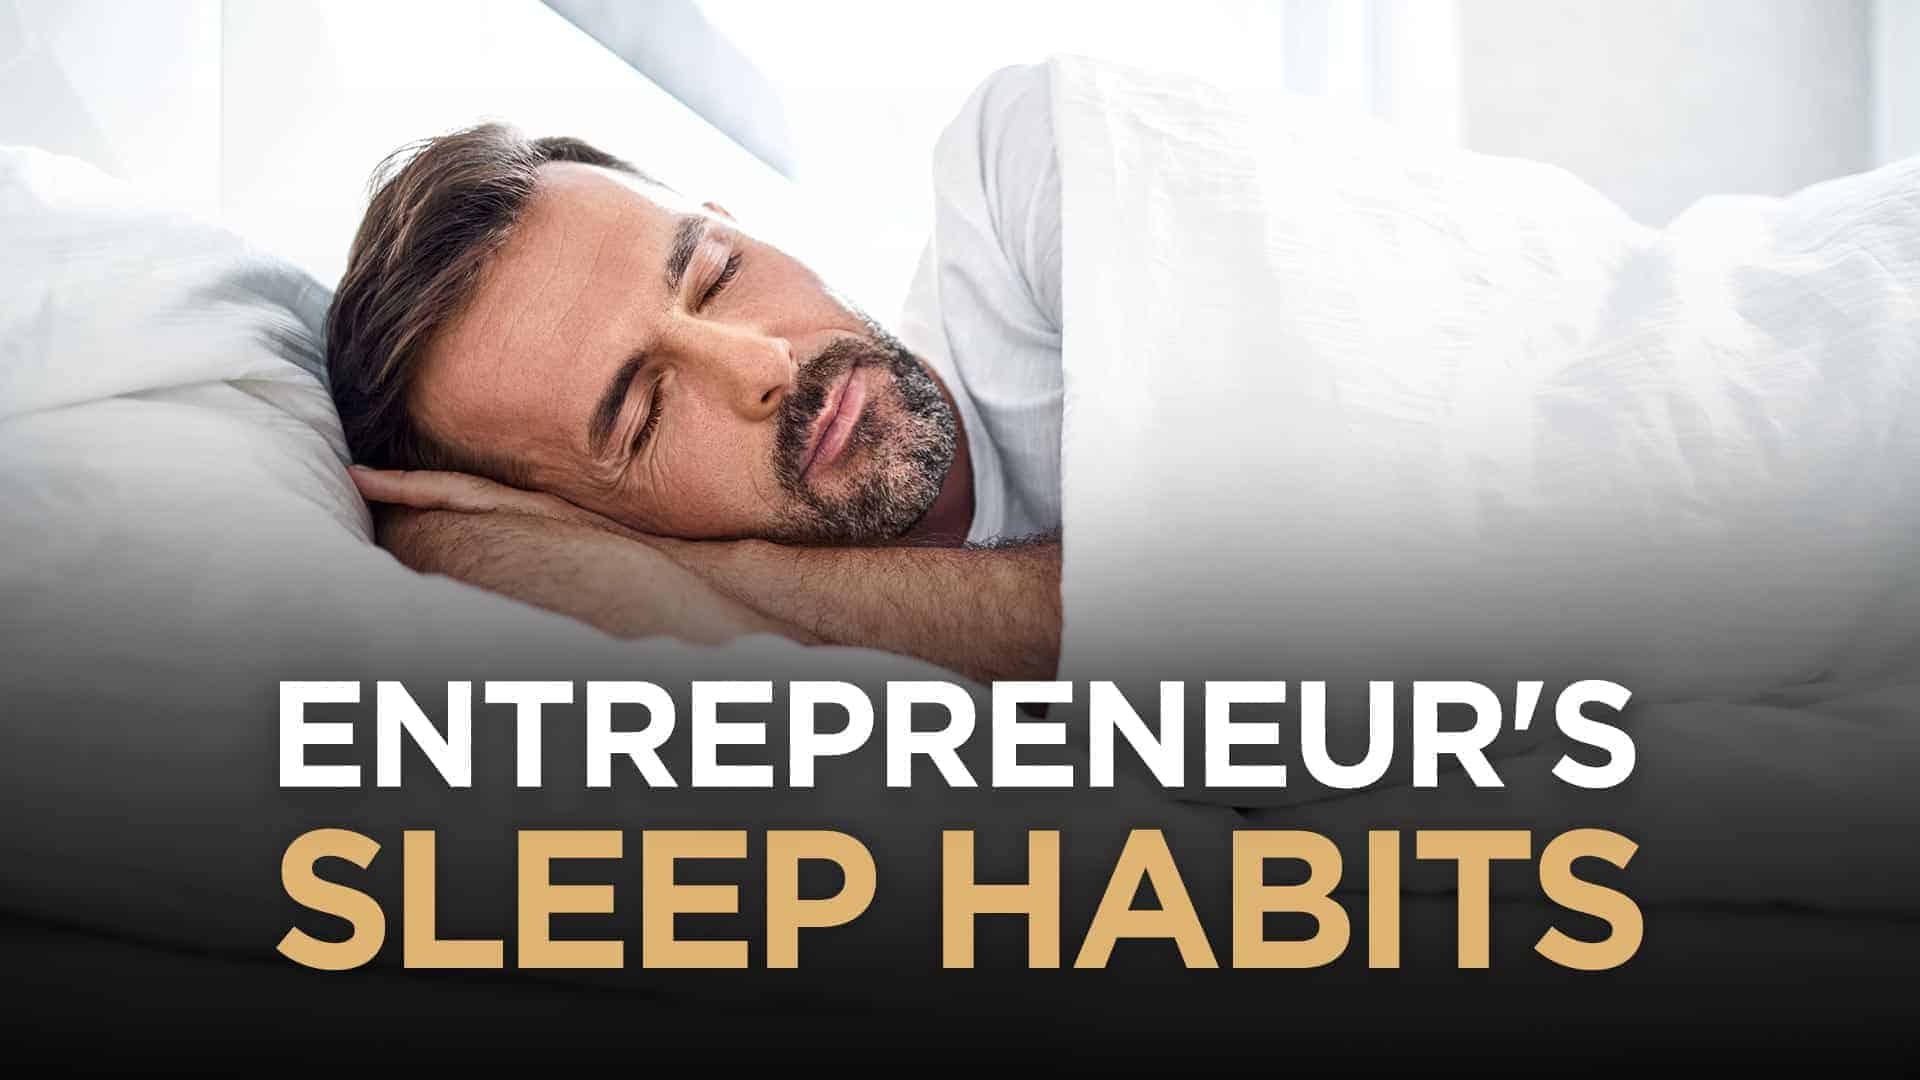 How To Get Better Sleep Quality With An Entrepreneur's Lifestyle